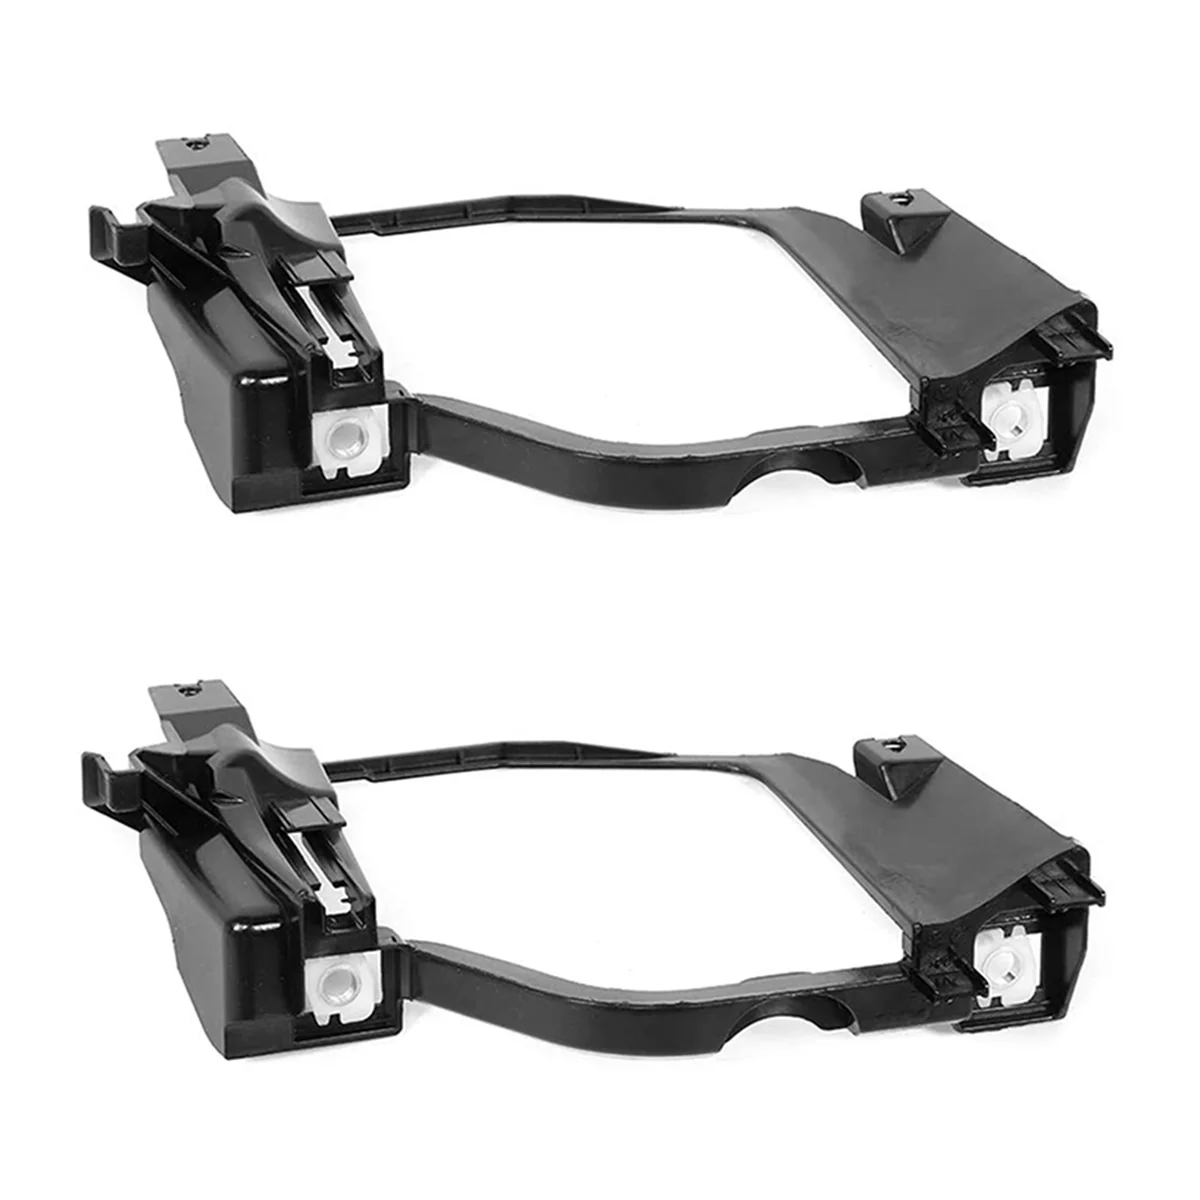 

2X Headlight Mounting Brackets Support 63126936090 Fit for -BMW 5 Series E60 E61 525I 528Xi 530I Auto Accessories